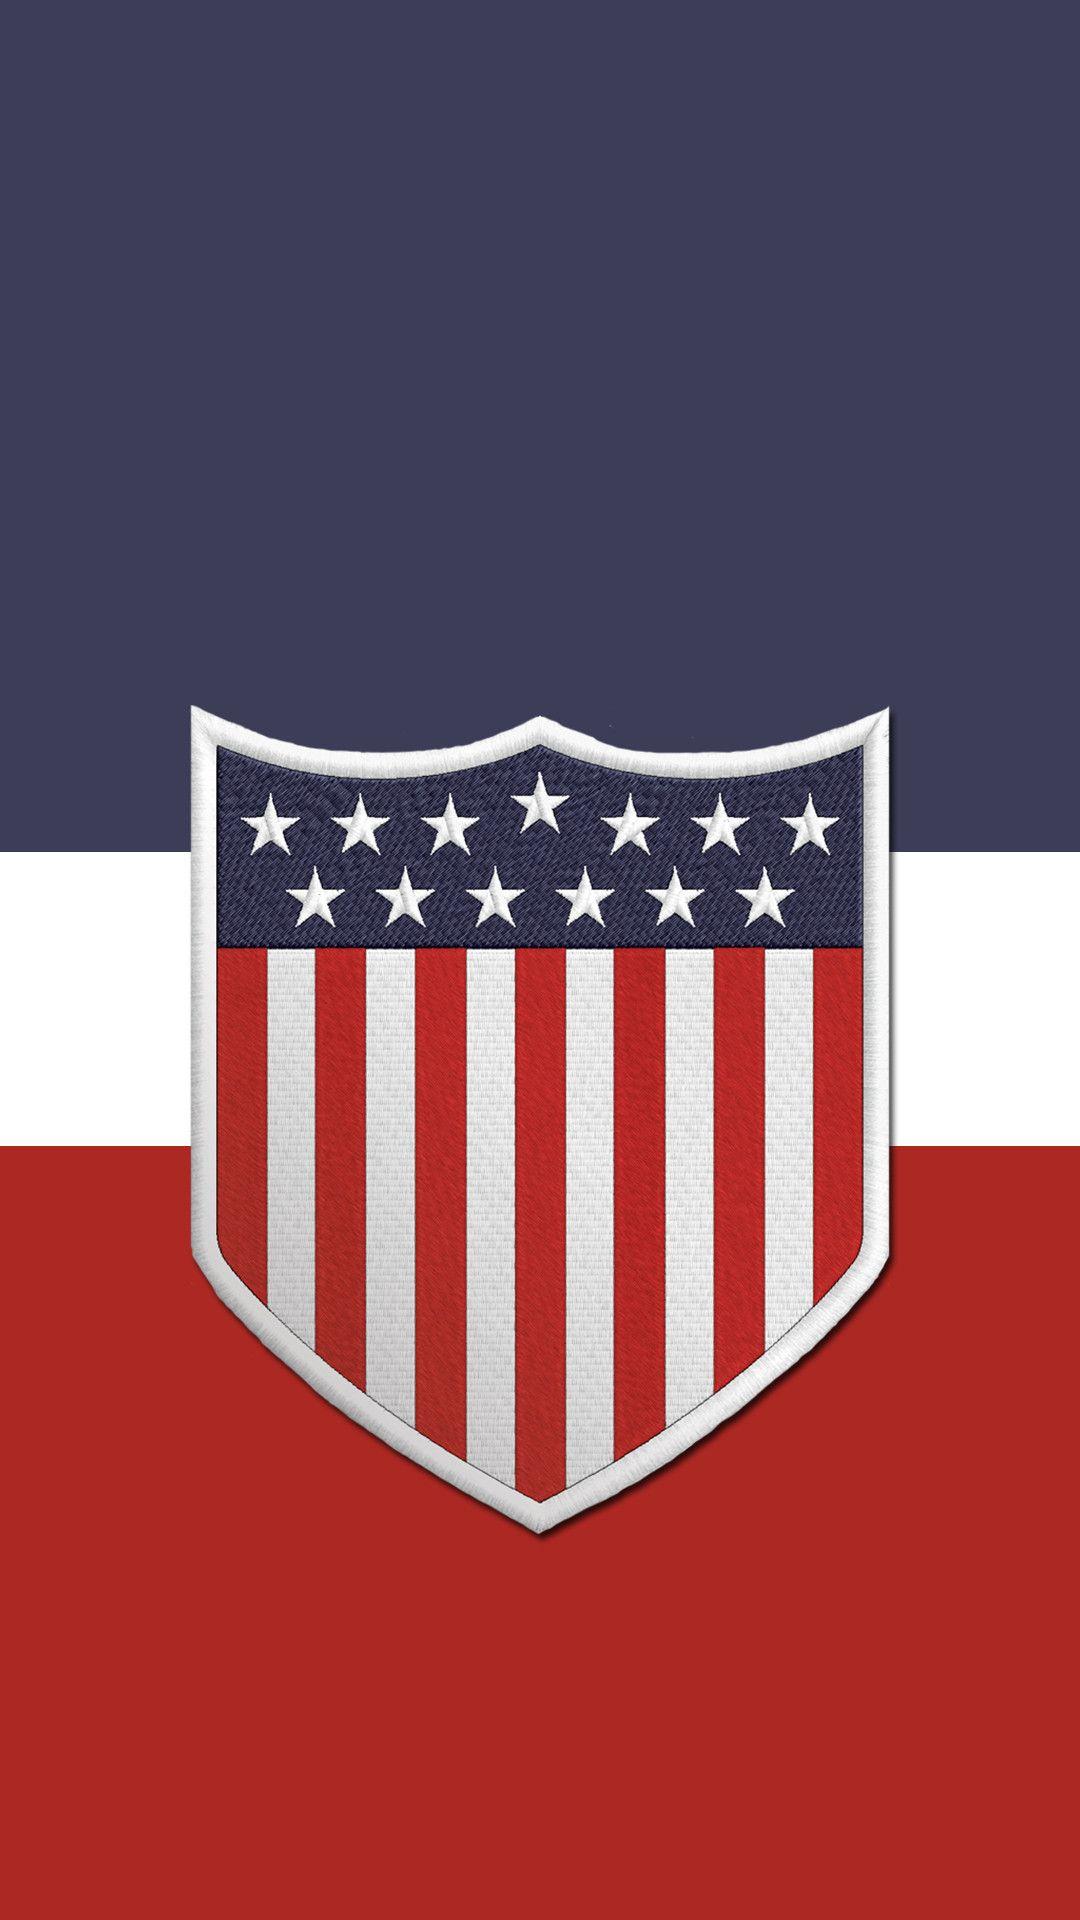 Another US soccer phone wallpaper. Centennial crest this time